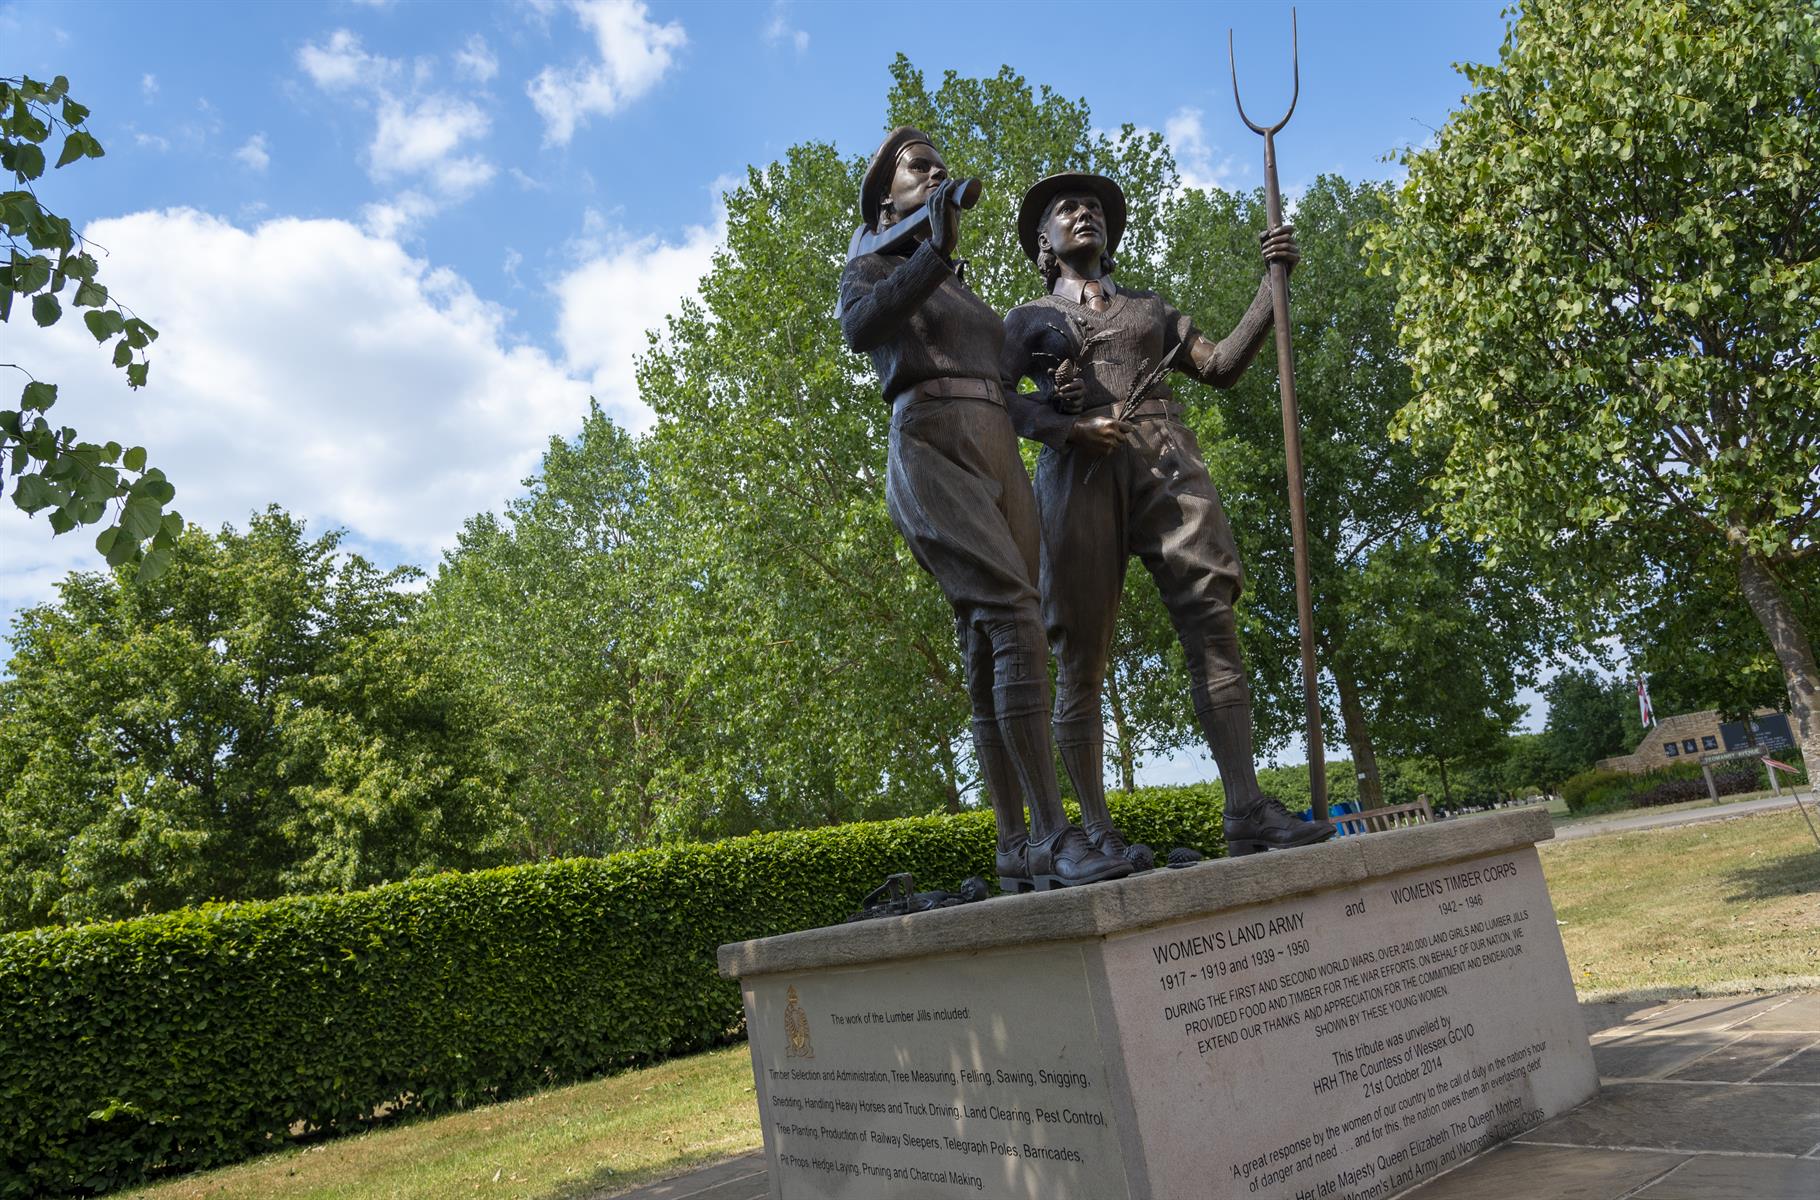 Women's Land Army and Timber Corps Memorial 